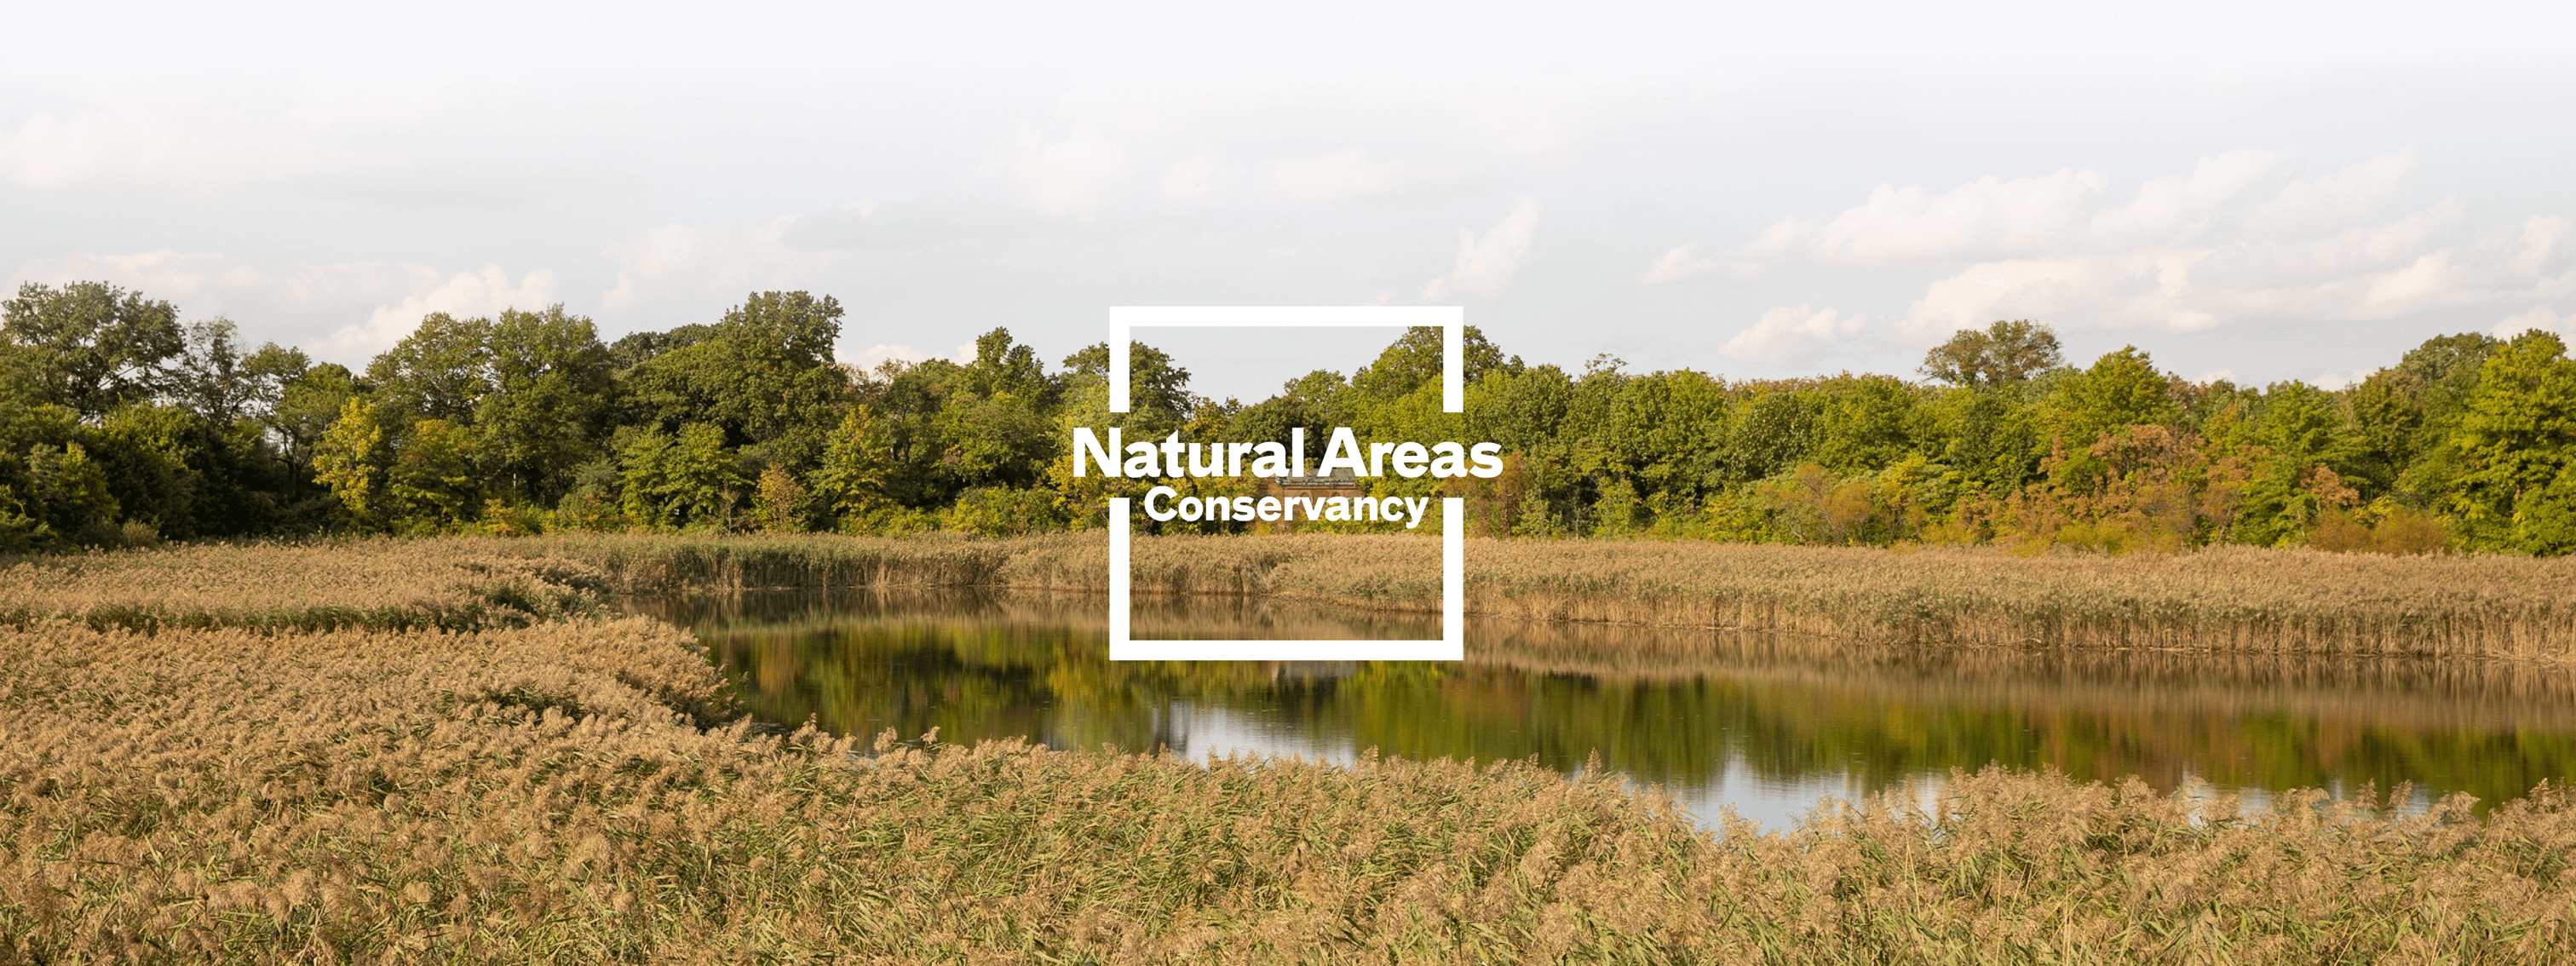 Natural Areas Conservancy hero image and logo